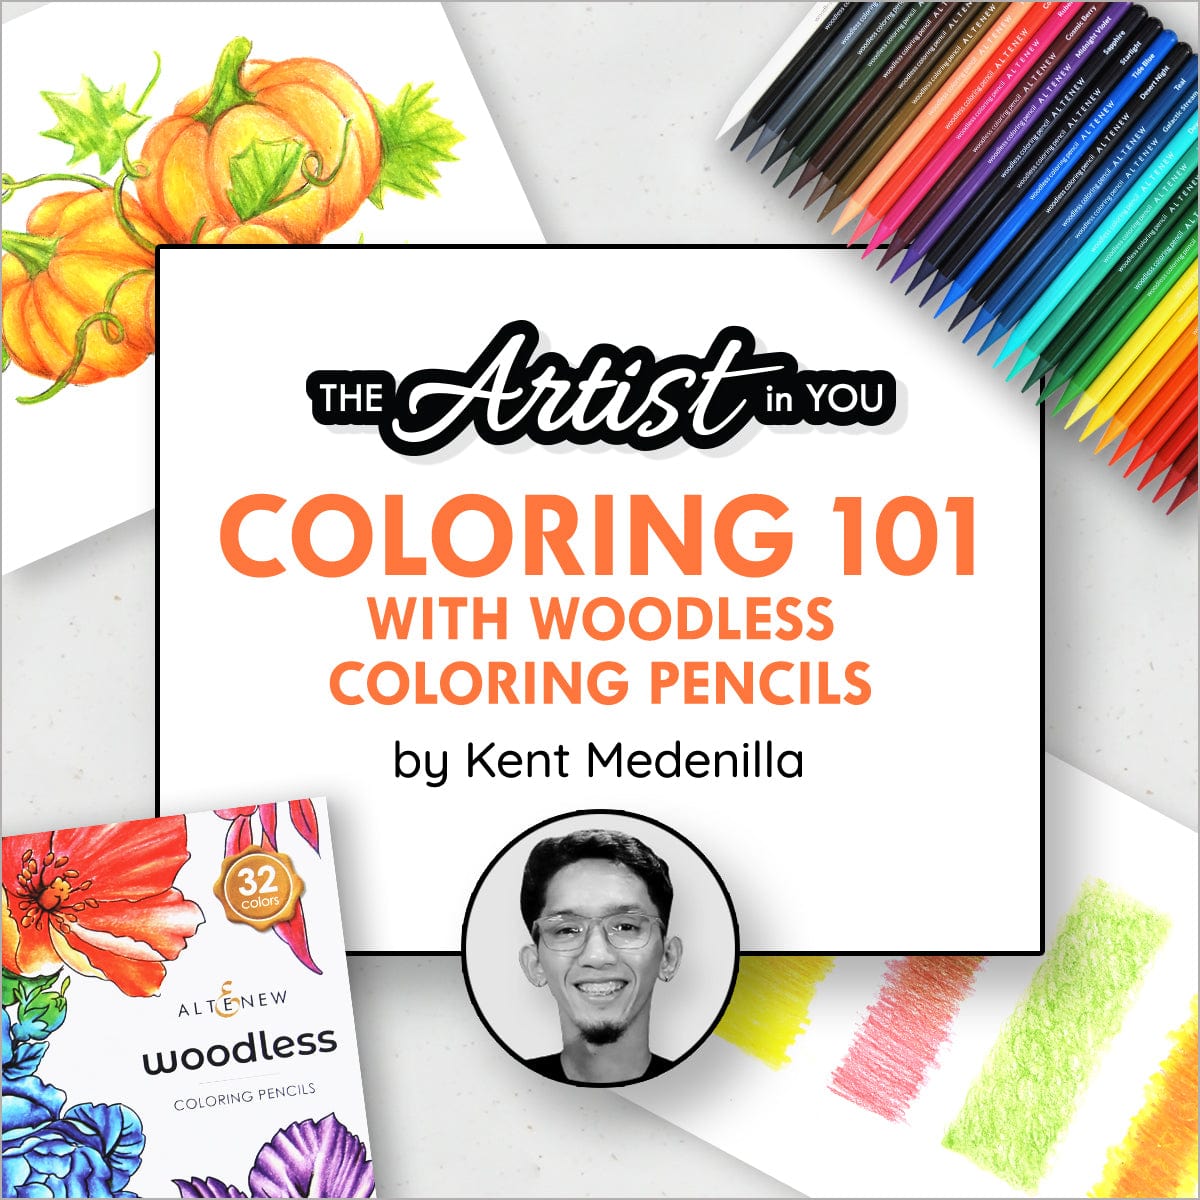 Class Artist in You: Coloring 101 With Woodless Coloring Pencils